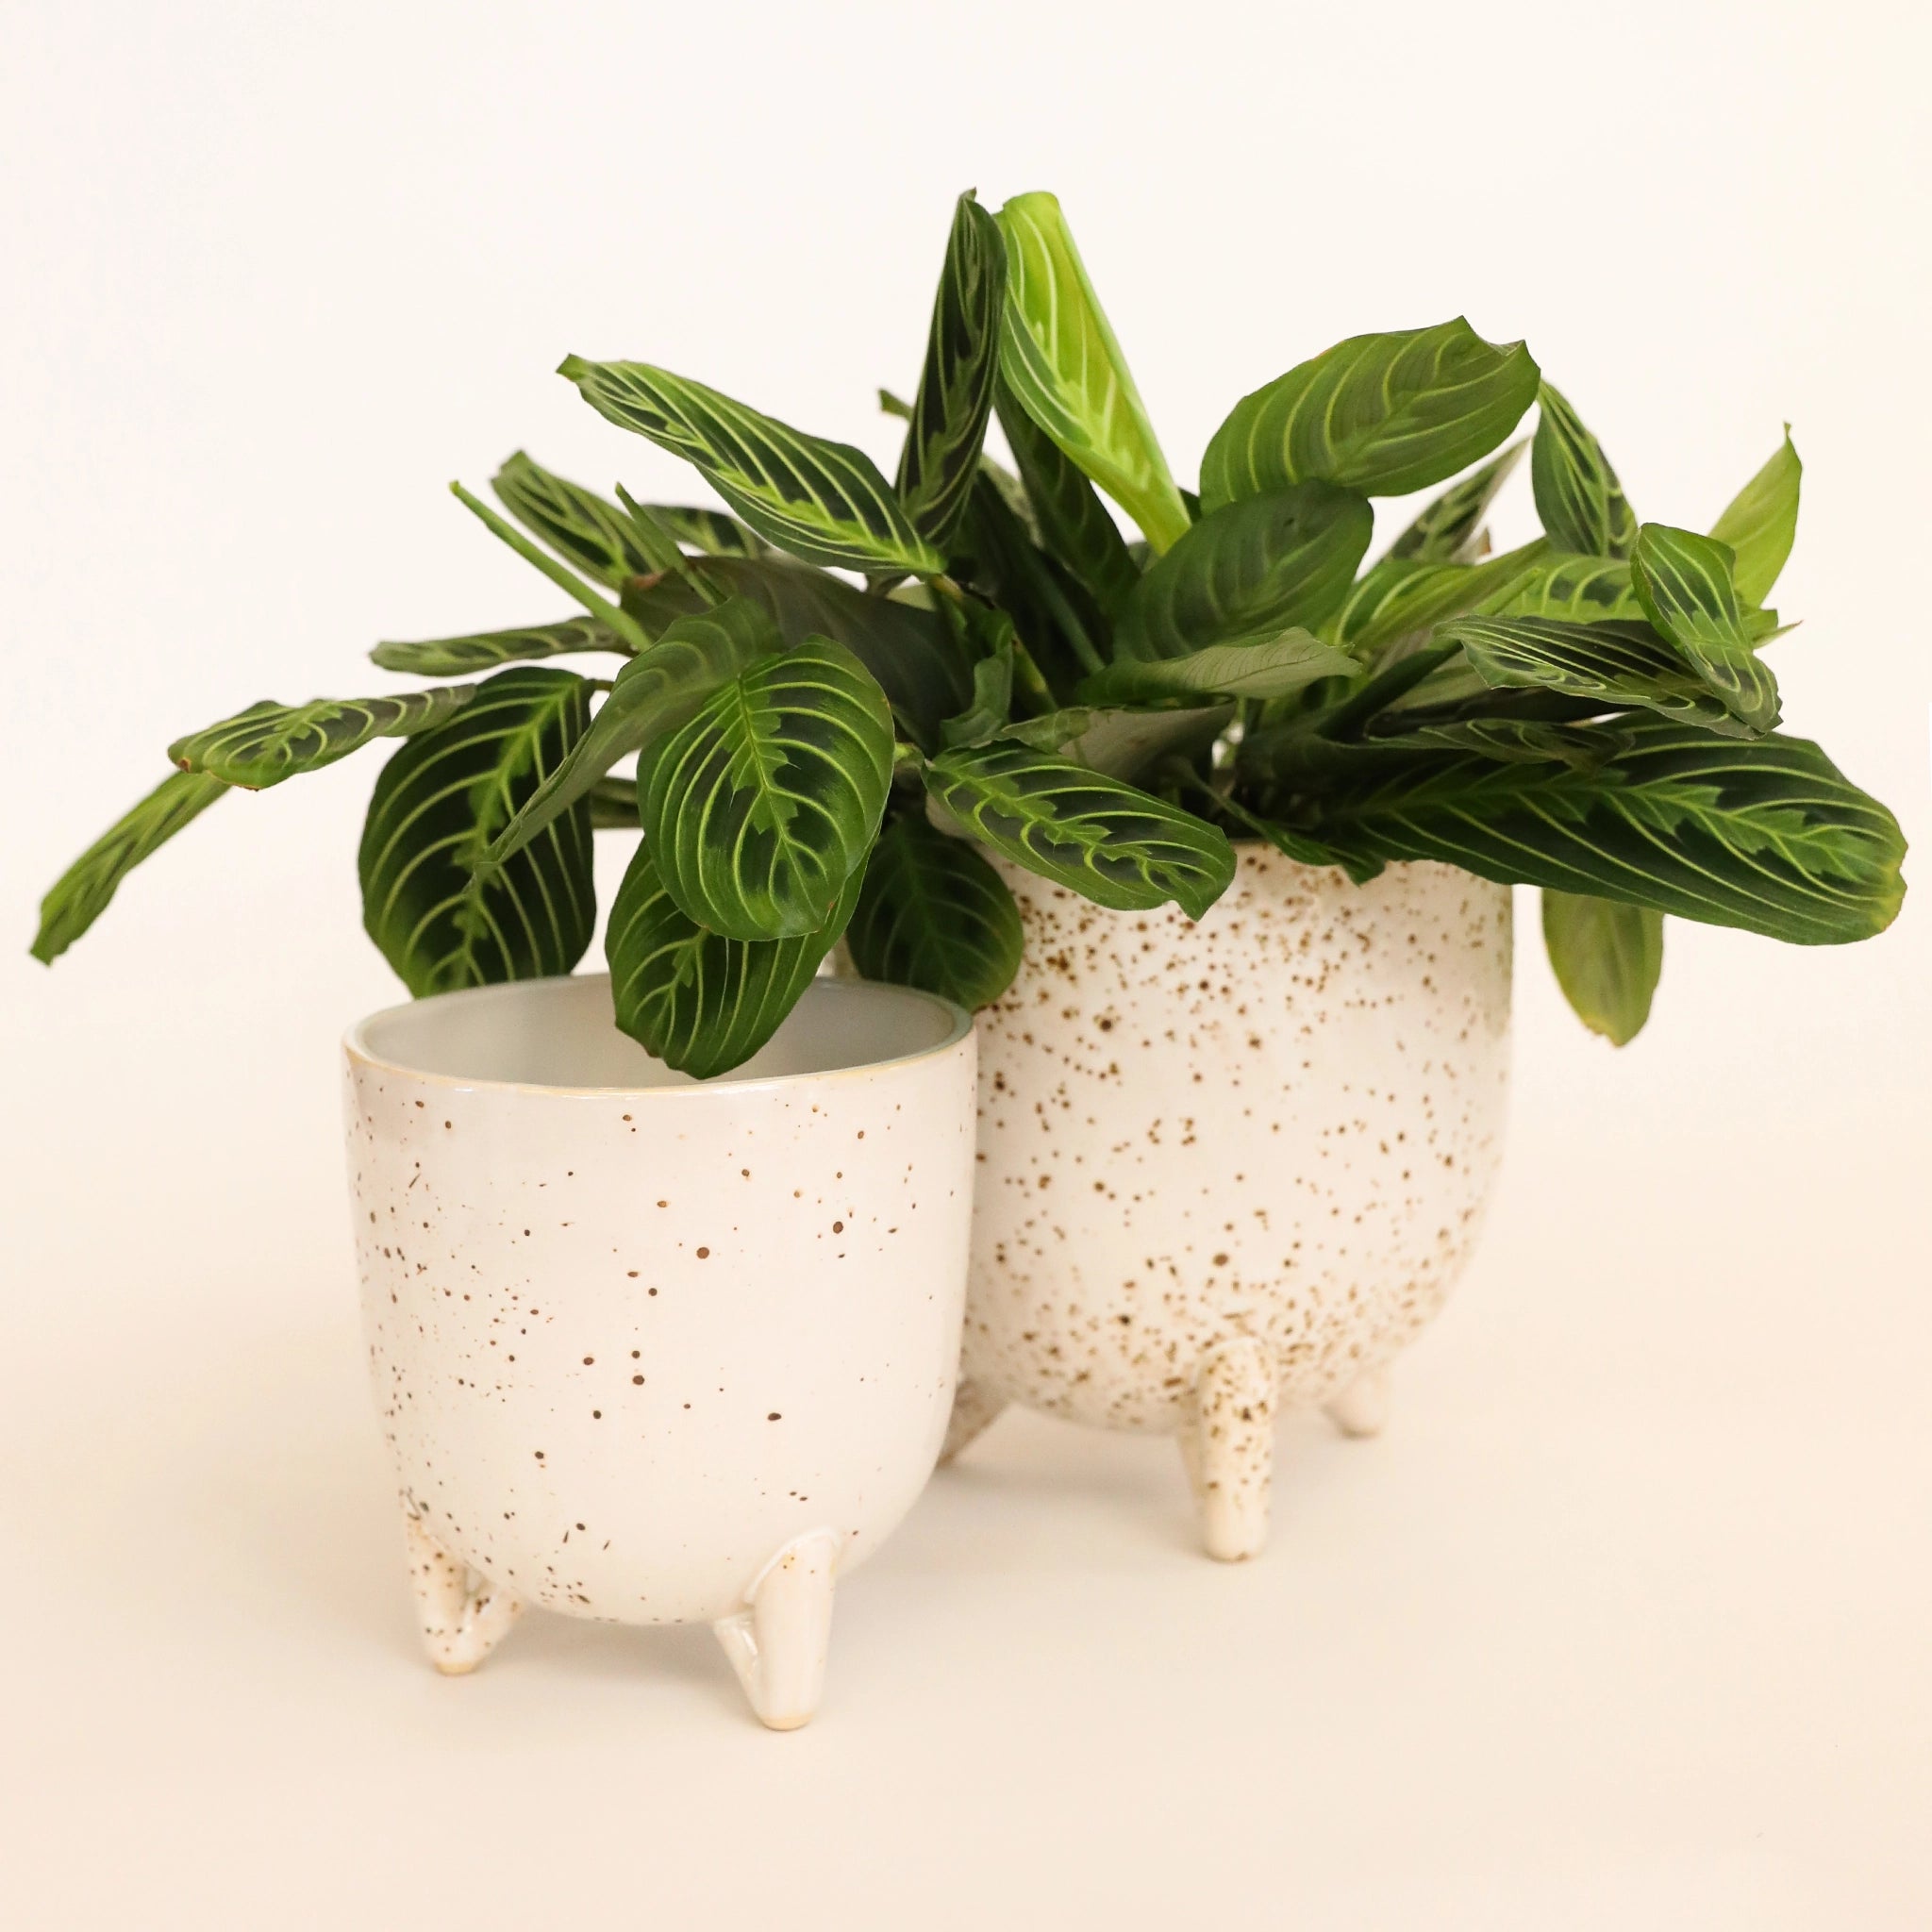 In front of a white background is a round footed pot. The pot is a cream color with dark brown specks. Inside the pot is bright green prayer plant. To the left is another pot just like the one on the right just a little smaller.